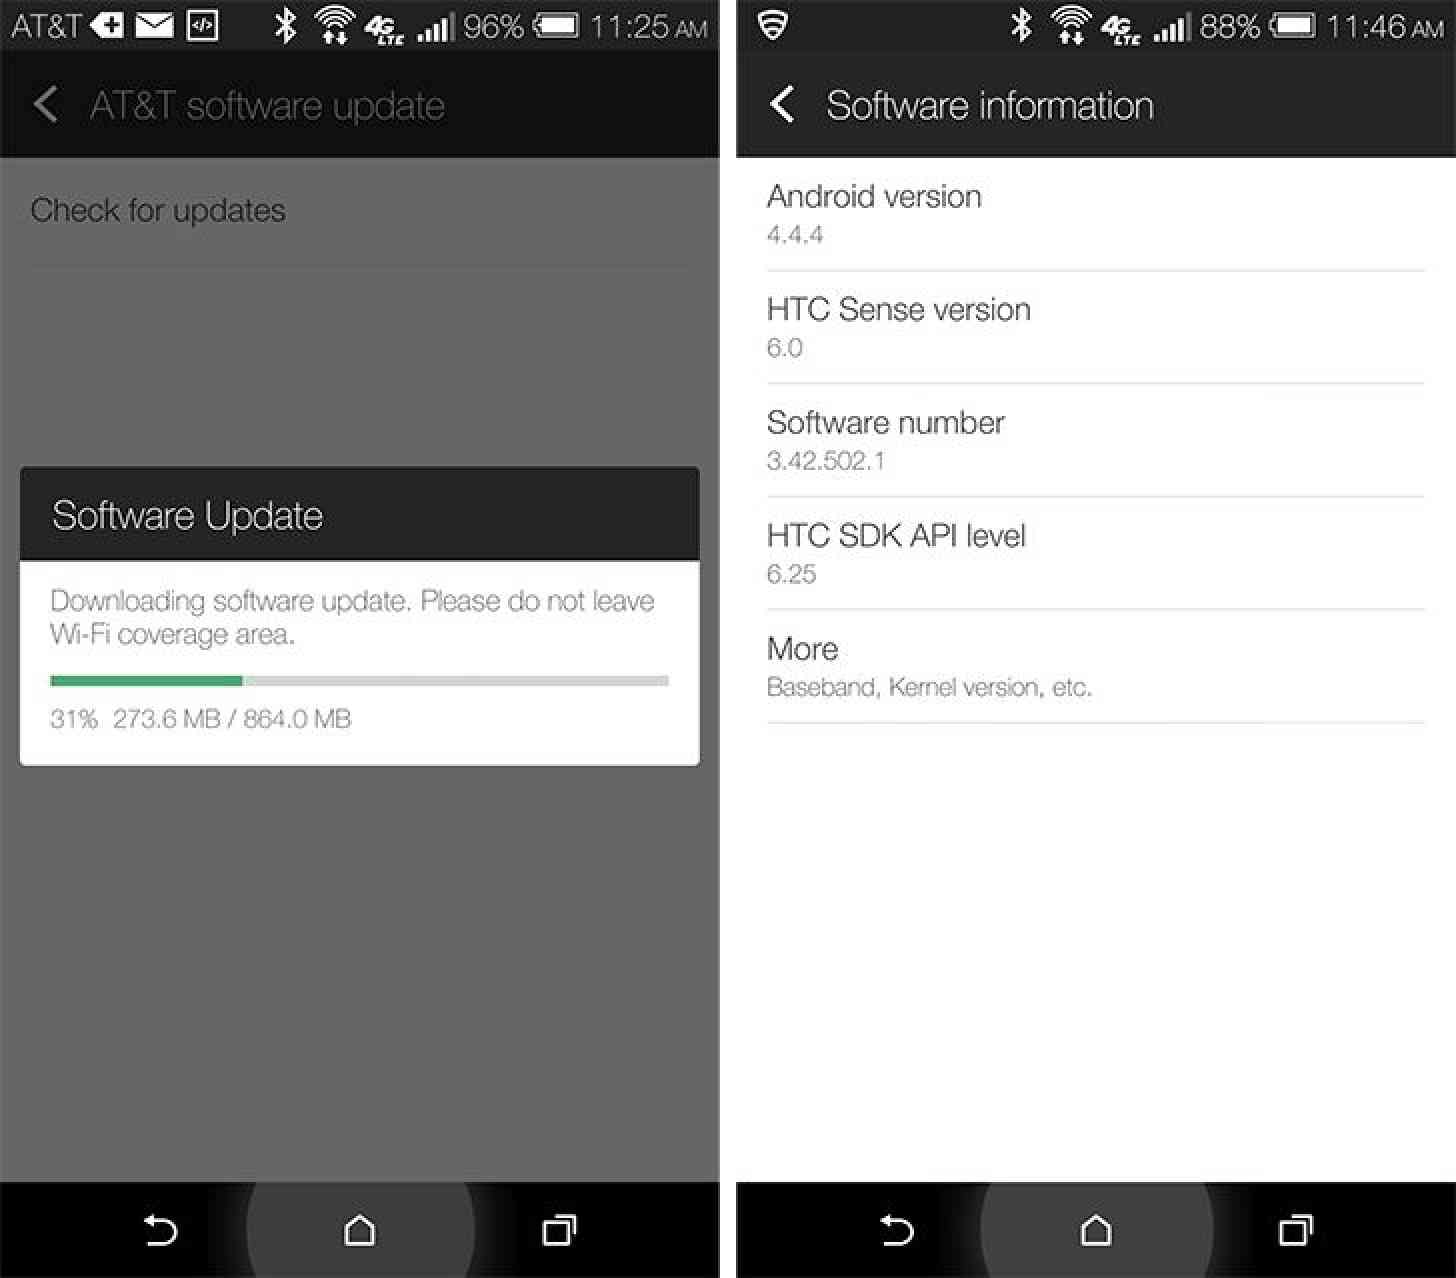 AT&T HTC One M8 Android 4.4.4 update